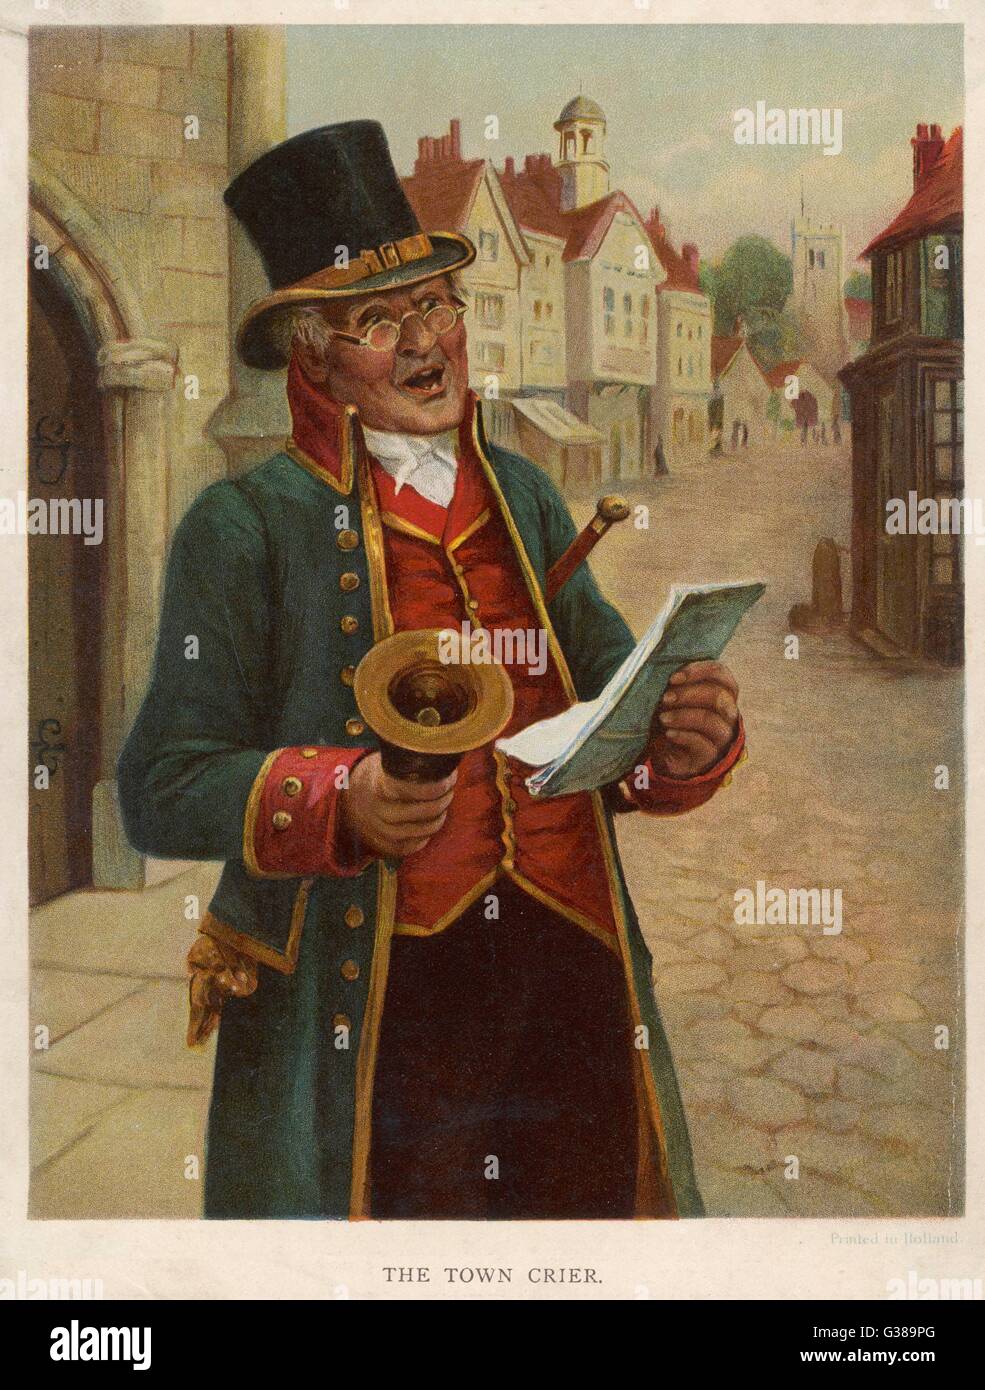 A town crier announces the  latest news         Date: 1890's Stock Photo